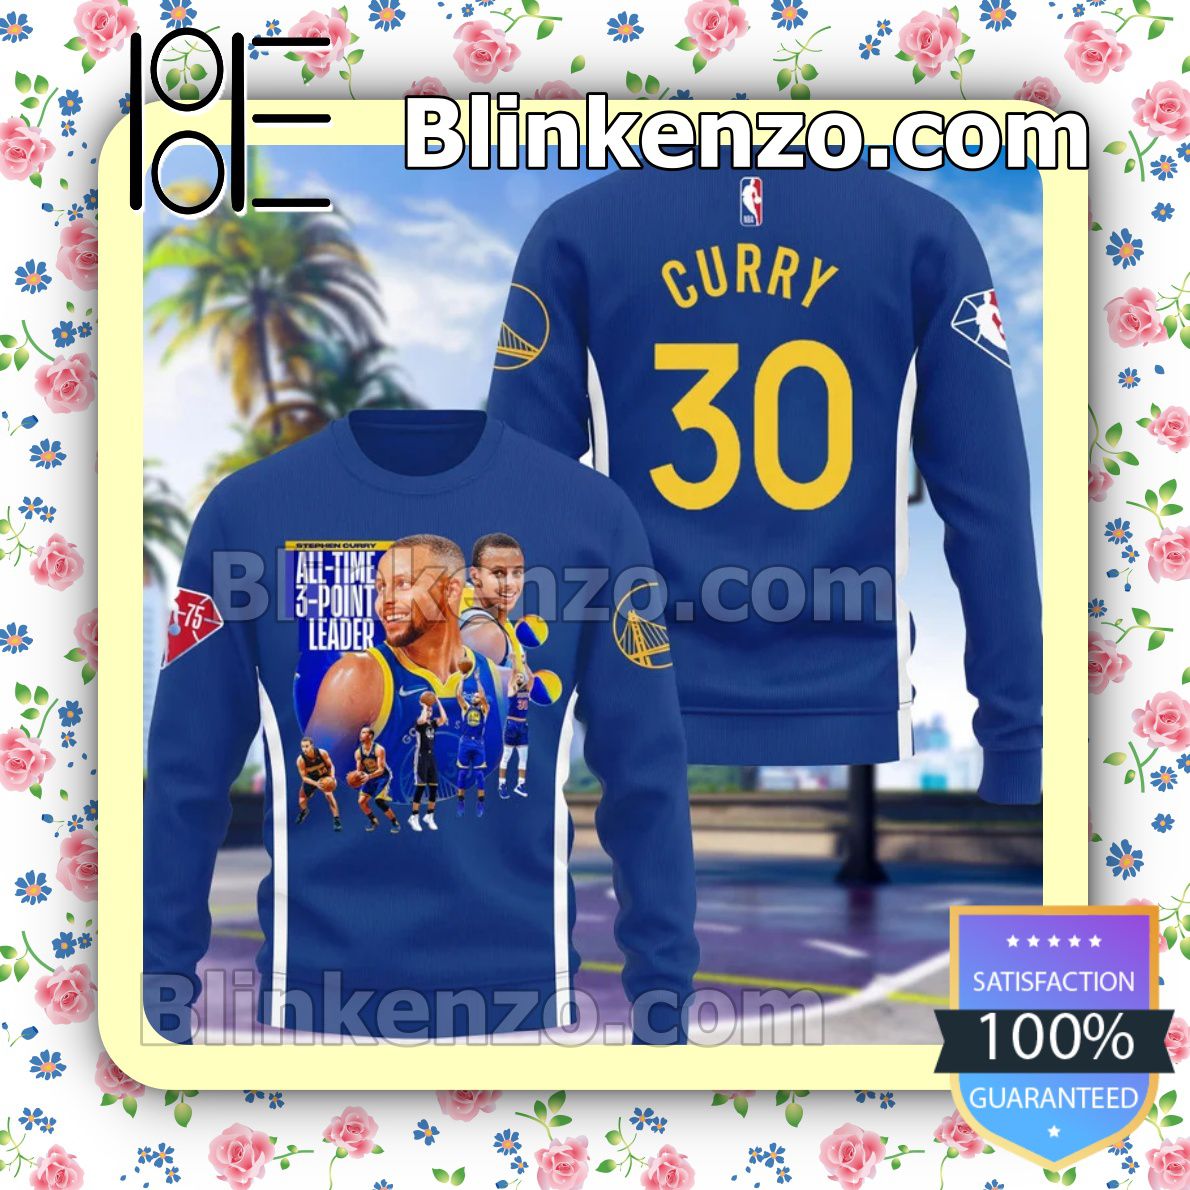 Fantastic Stephen Curry All Time 3 Point Leader Hoodies, Long Sleeve Shirt